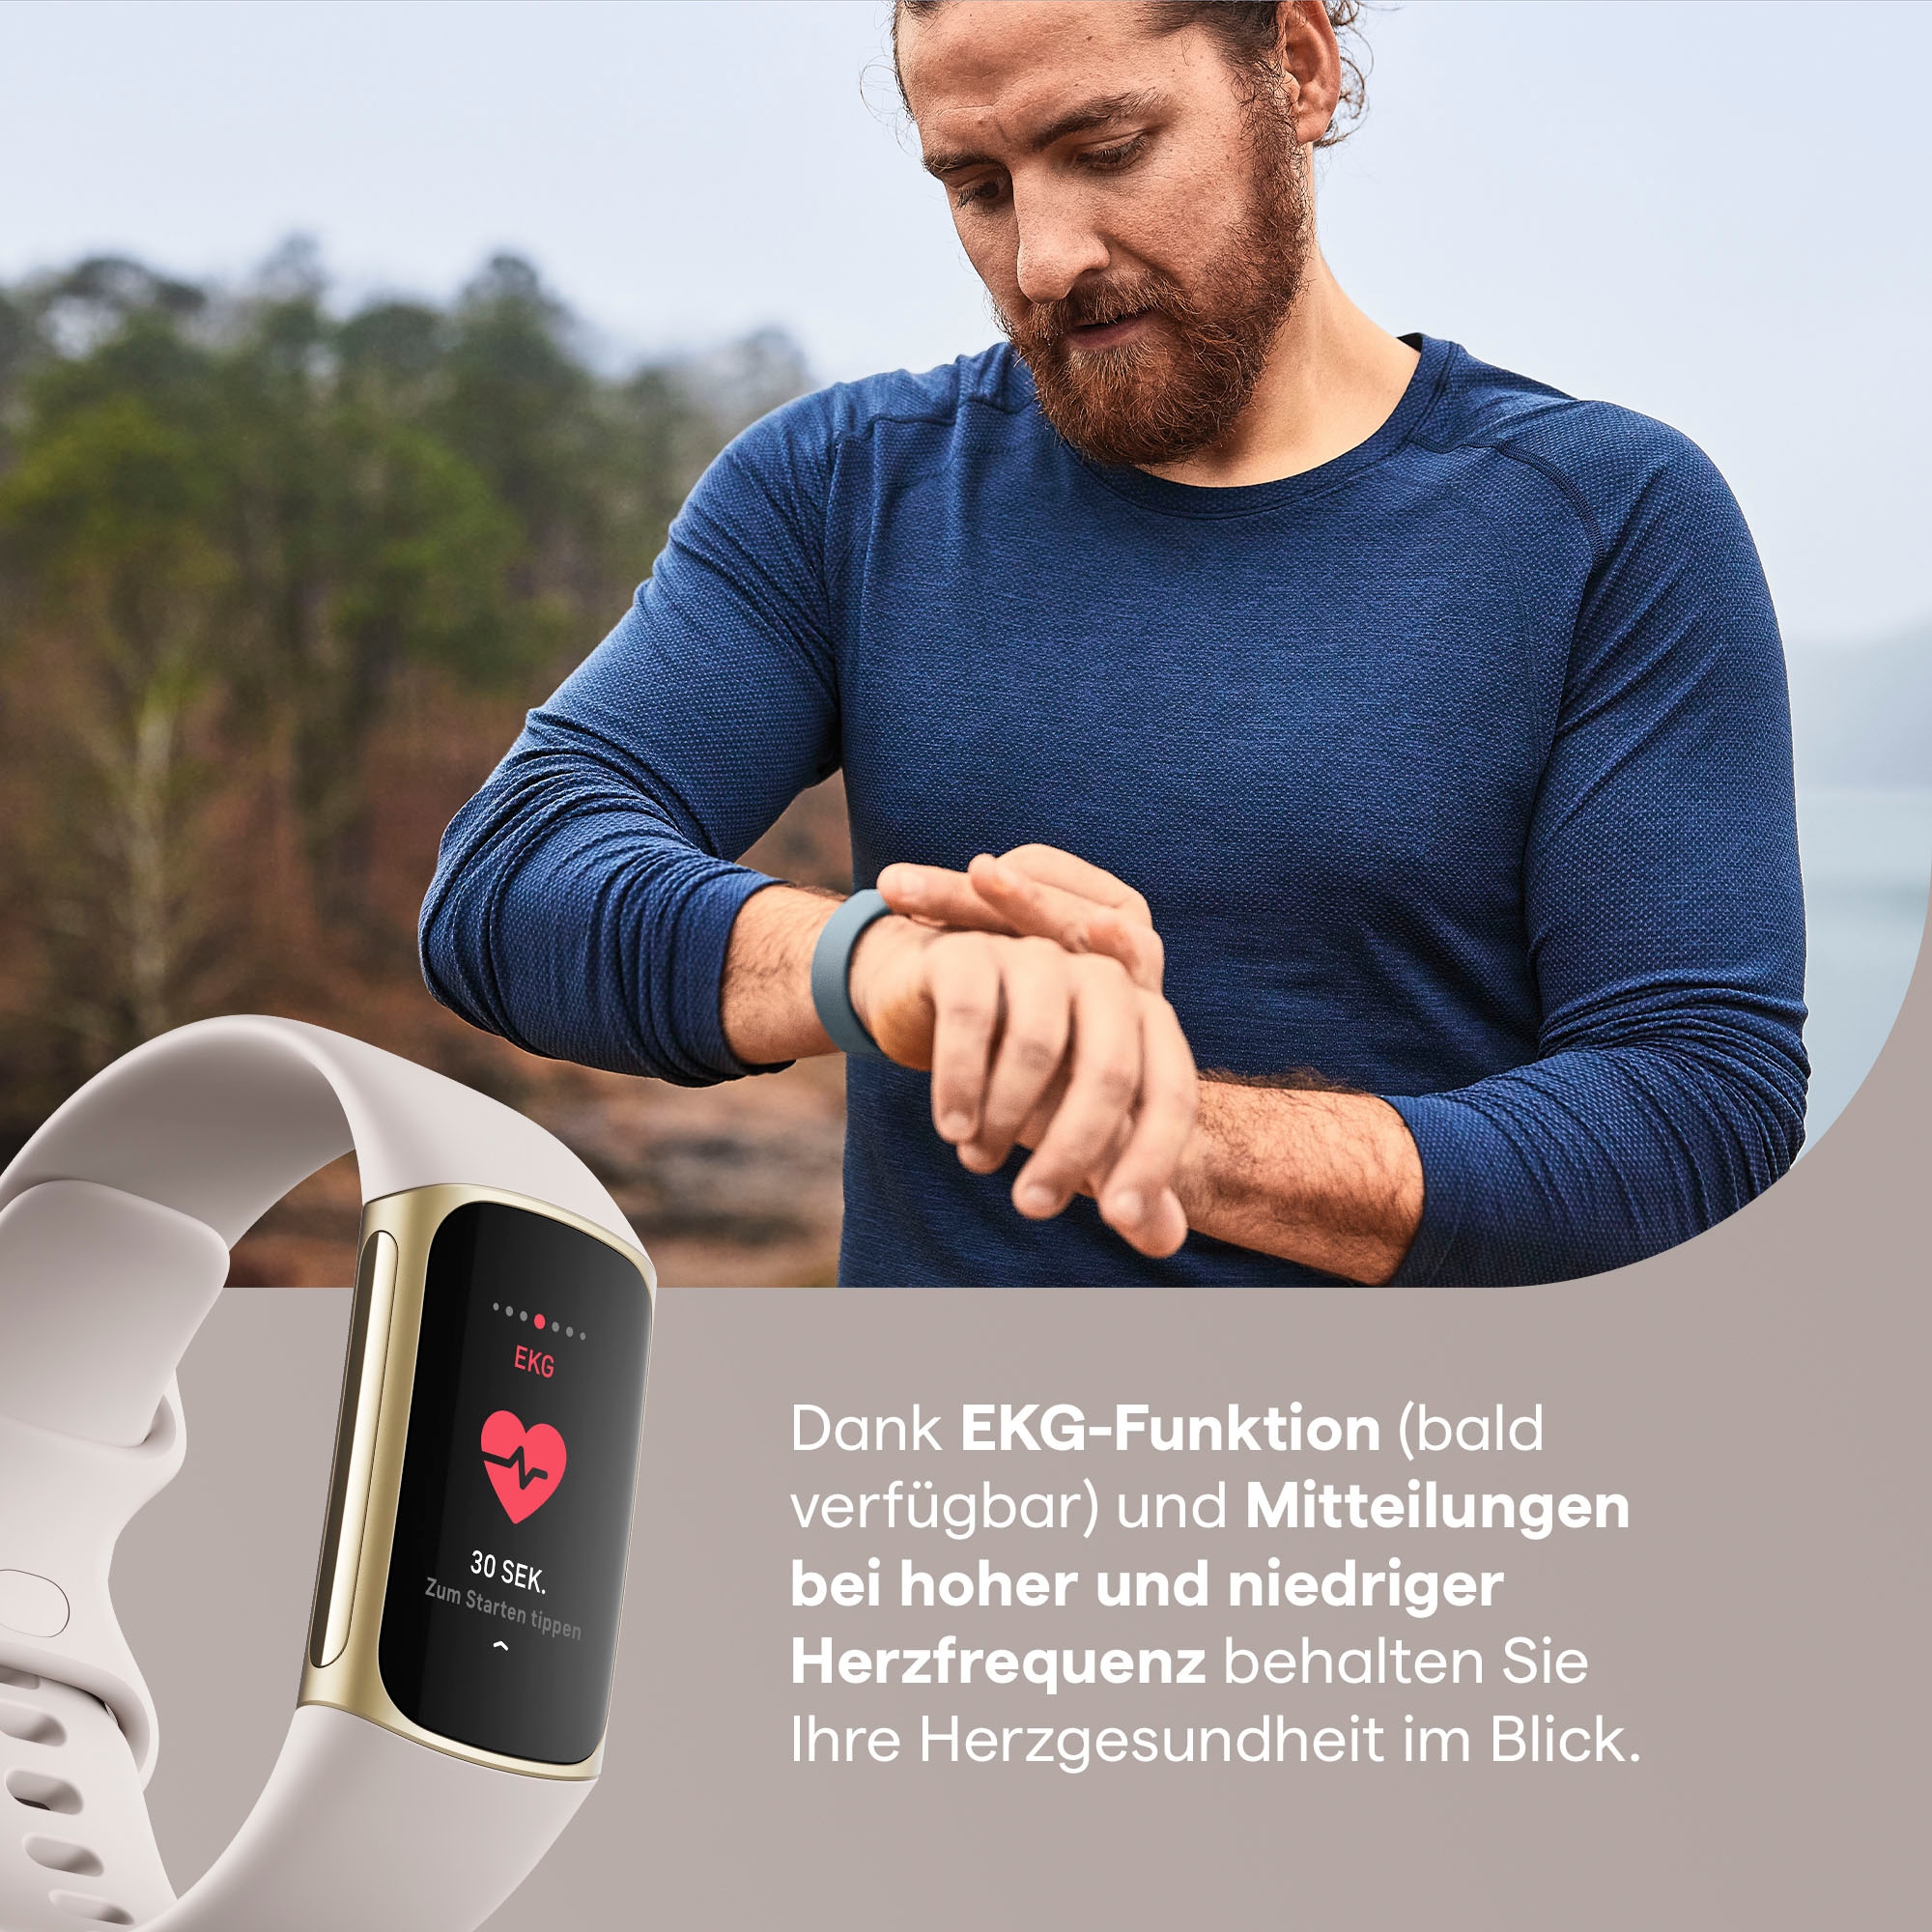 fitbit by Fitbit jetzt Google OTTO 6 Smartwatch 5«, kaufen (FitbitOS5 bei »Charge inkl. Monate Premium)